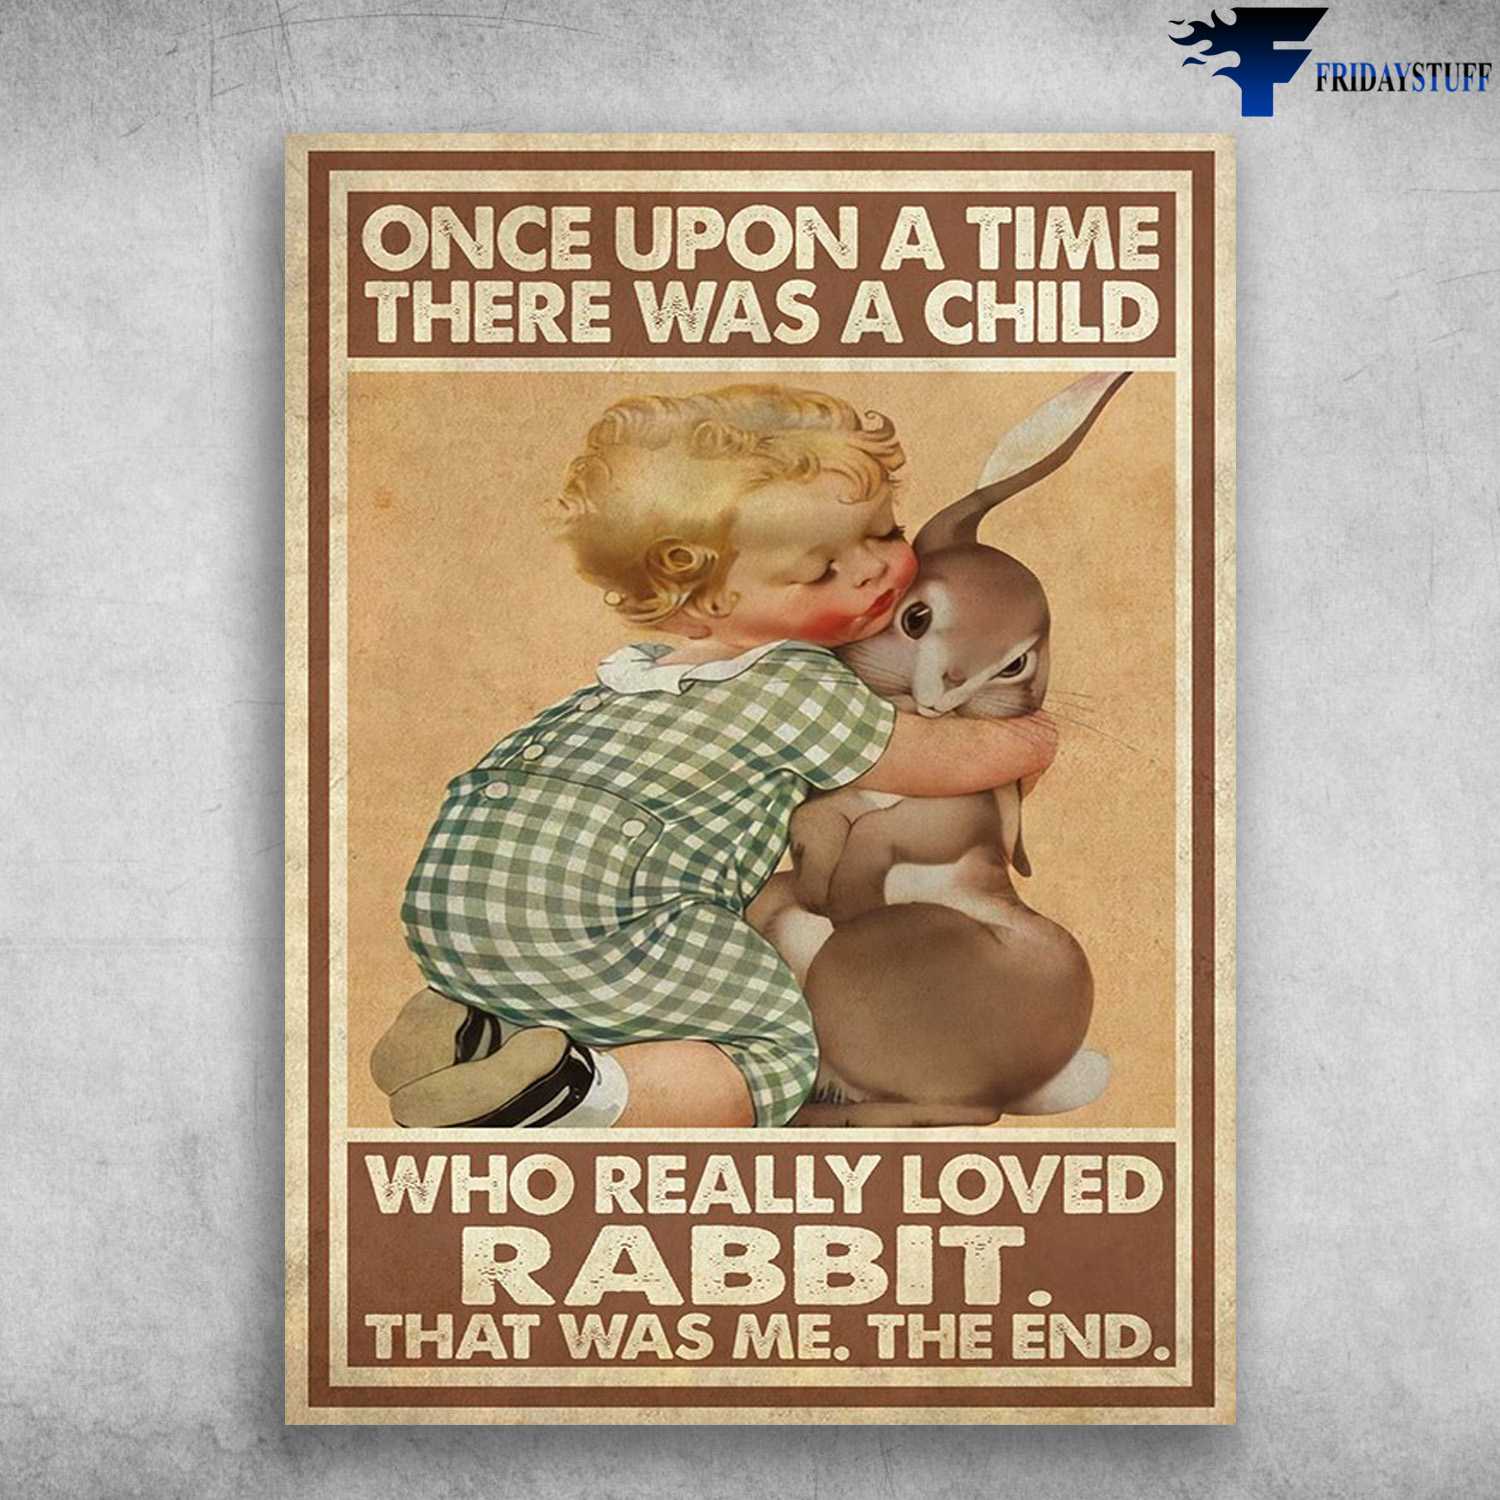 Rabbit Lover, Bunny Poster - Once Upon A Time, There Was A Child, Who Really Loved Rabbit, It Was Me, The End